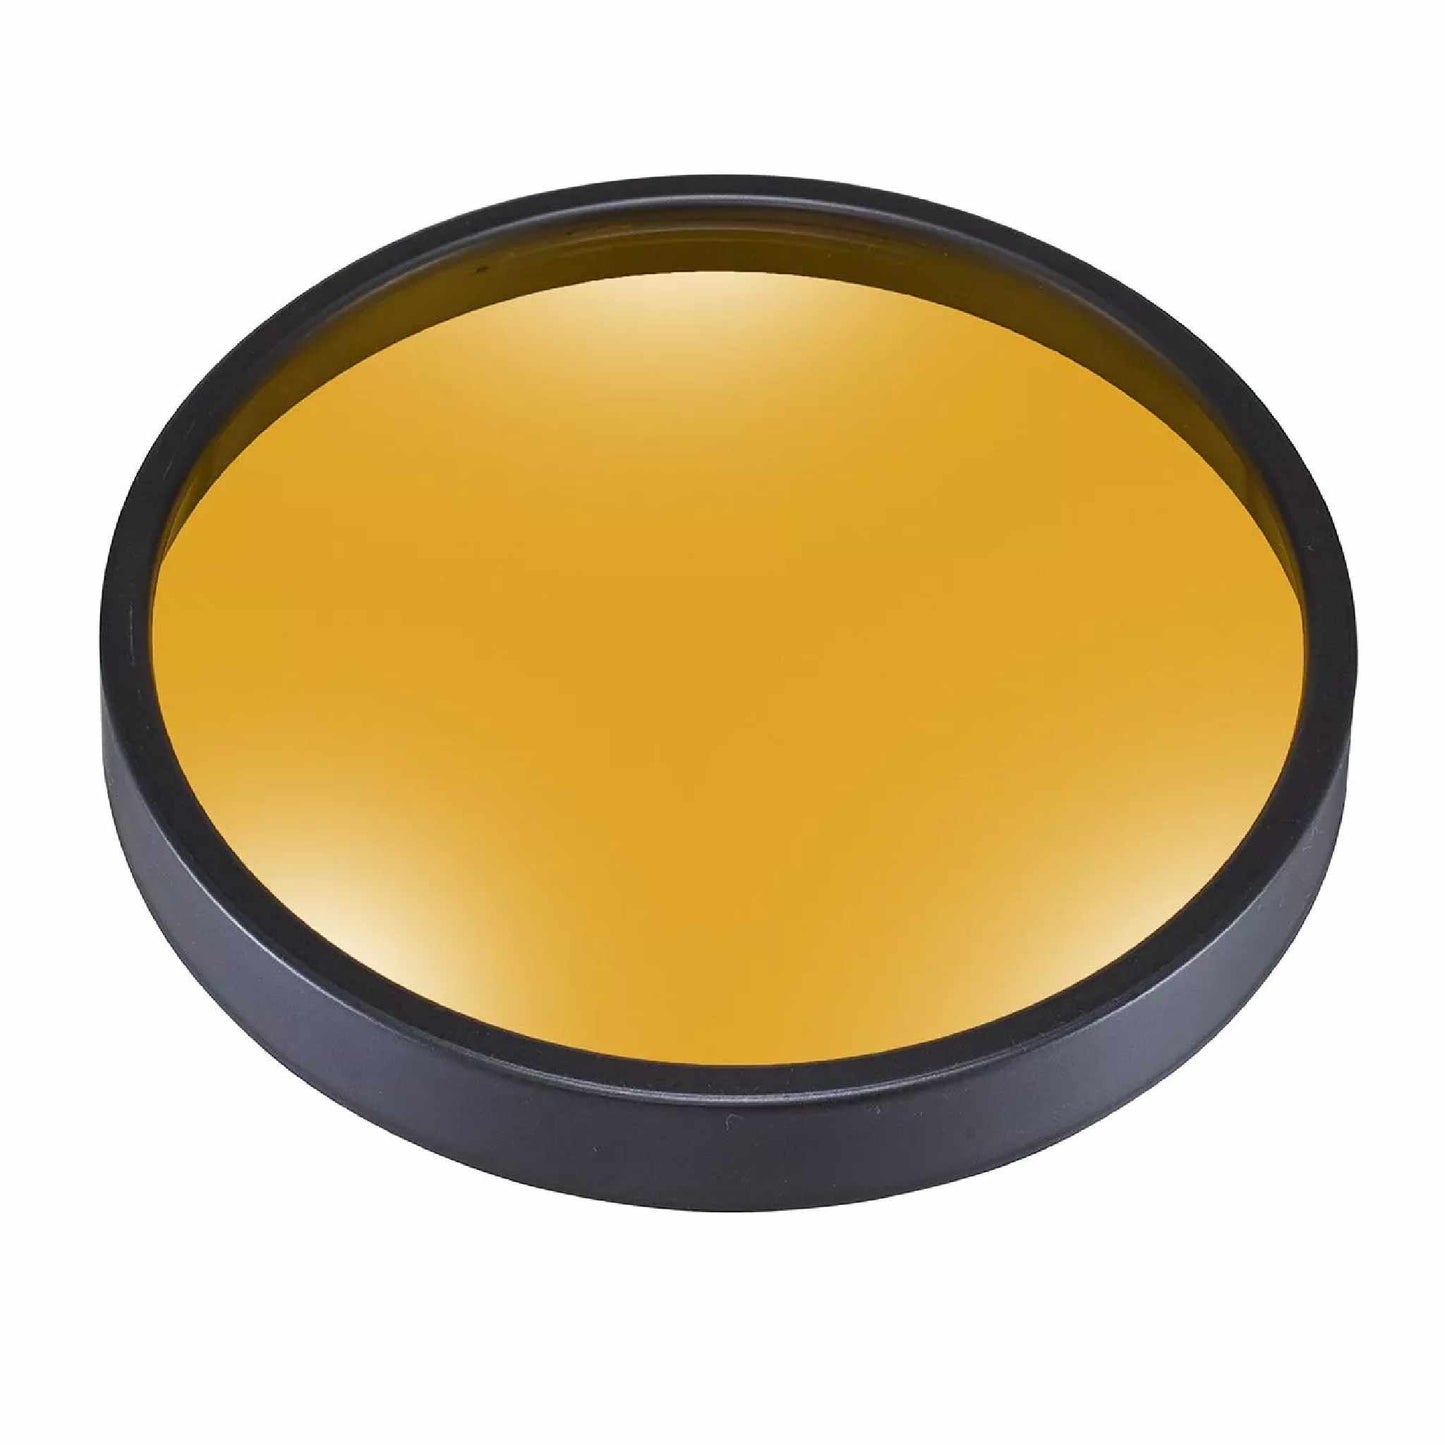 3" Orange Filter Lens for DeepSee MAX Magnified Magnetic Viewer - Flipper